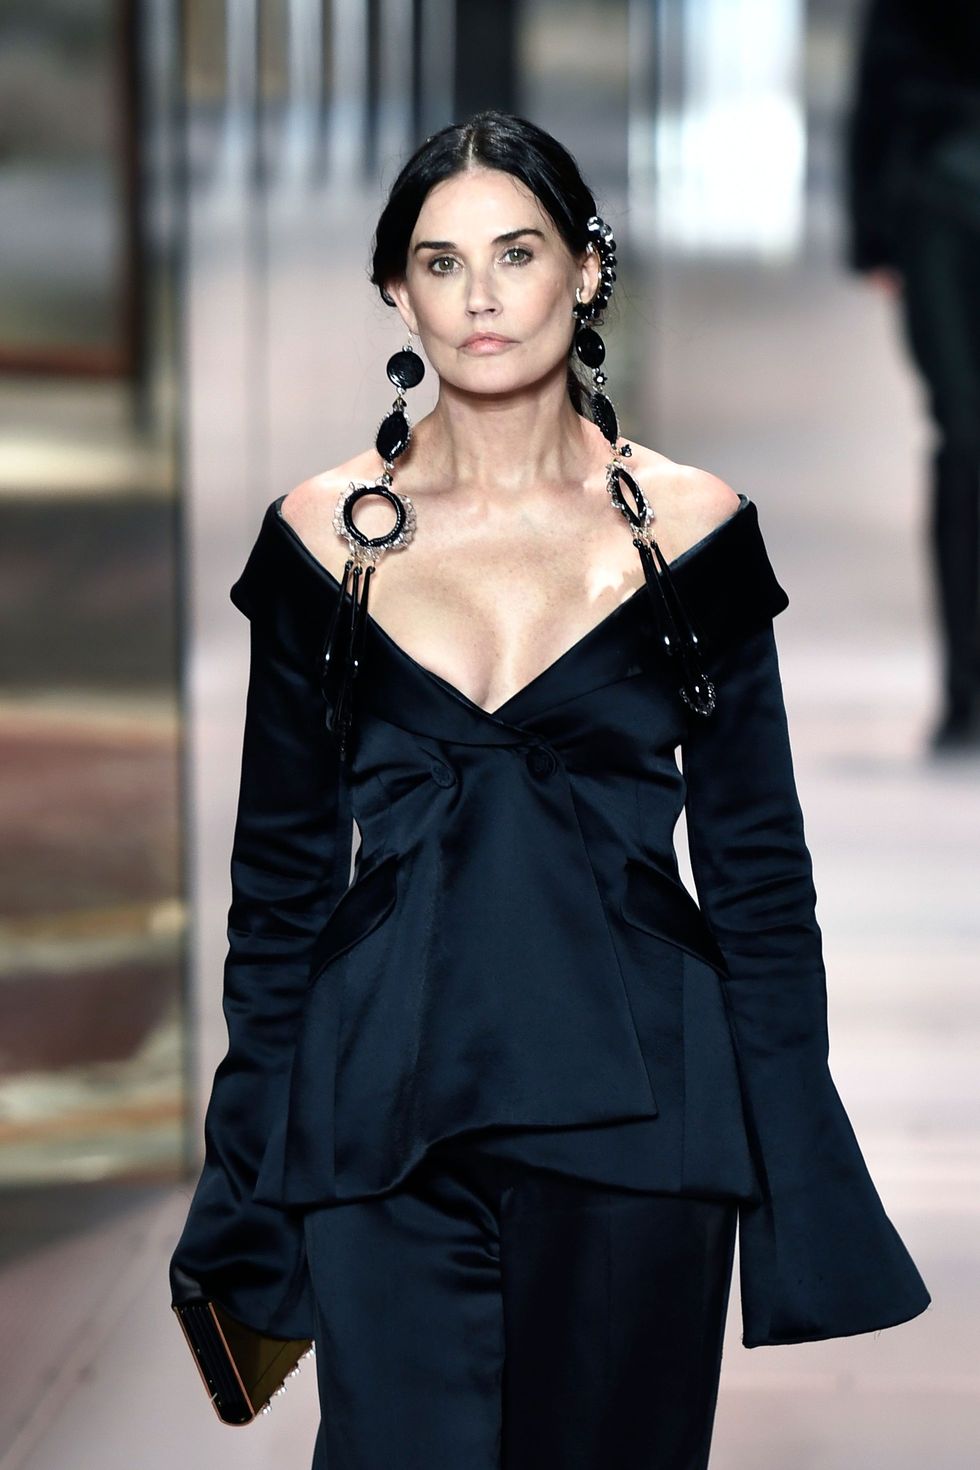 us actress demi moore presents a creation of british designer kim jones for the fendis spring summer 2021 collection during the paris haute couture fashion week, in paris, on january 27, 2021   british designer kim jones presents his first ever couture collection for fendi since he joinded italian fashion house fendi as its lead designer for womenswear in september 2020 photo by stephane de sakutin  afp photo by stephane de sakutinafp via getty images